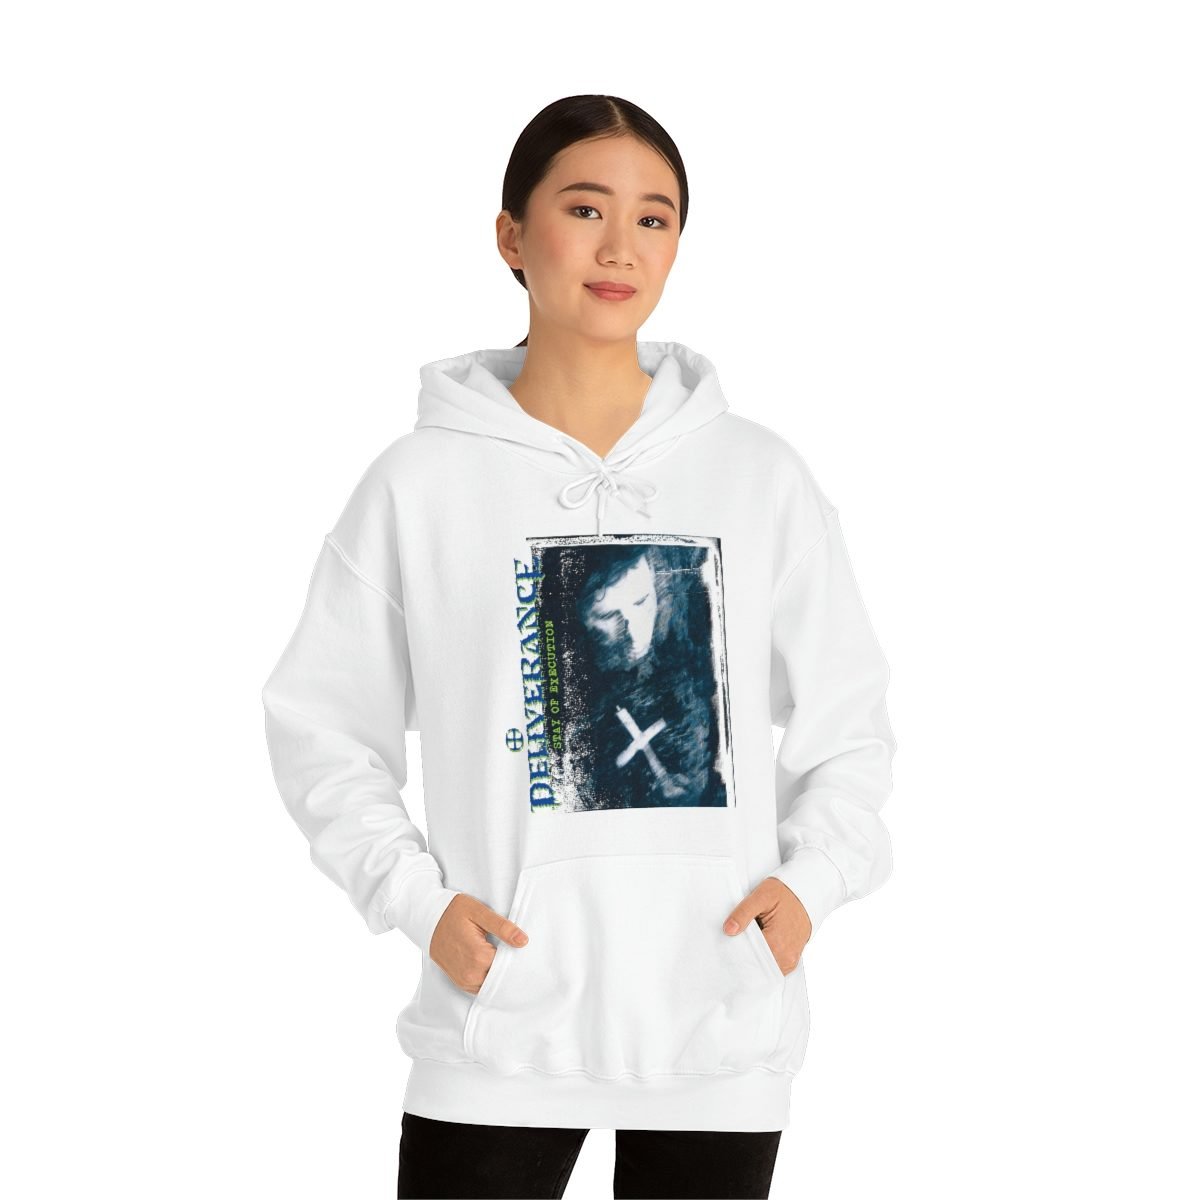 Deliverance – Stay of Execution (Light) Pullover Hooded Sweatshirt